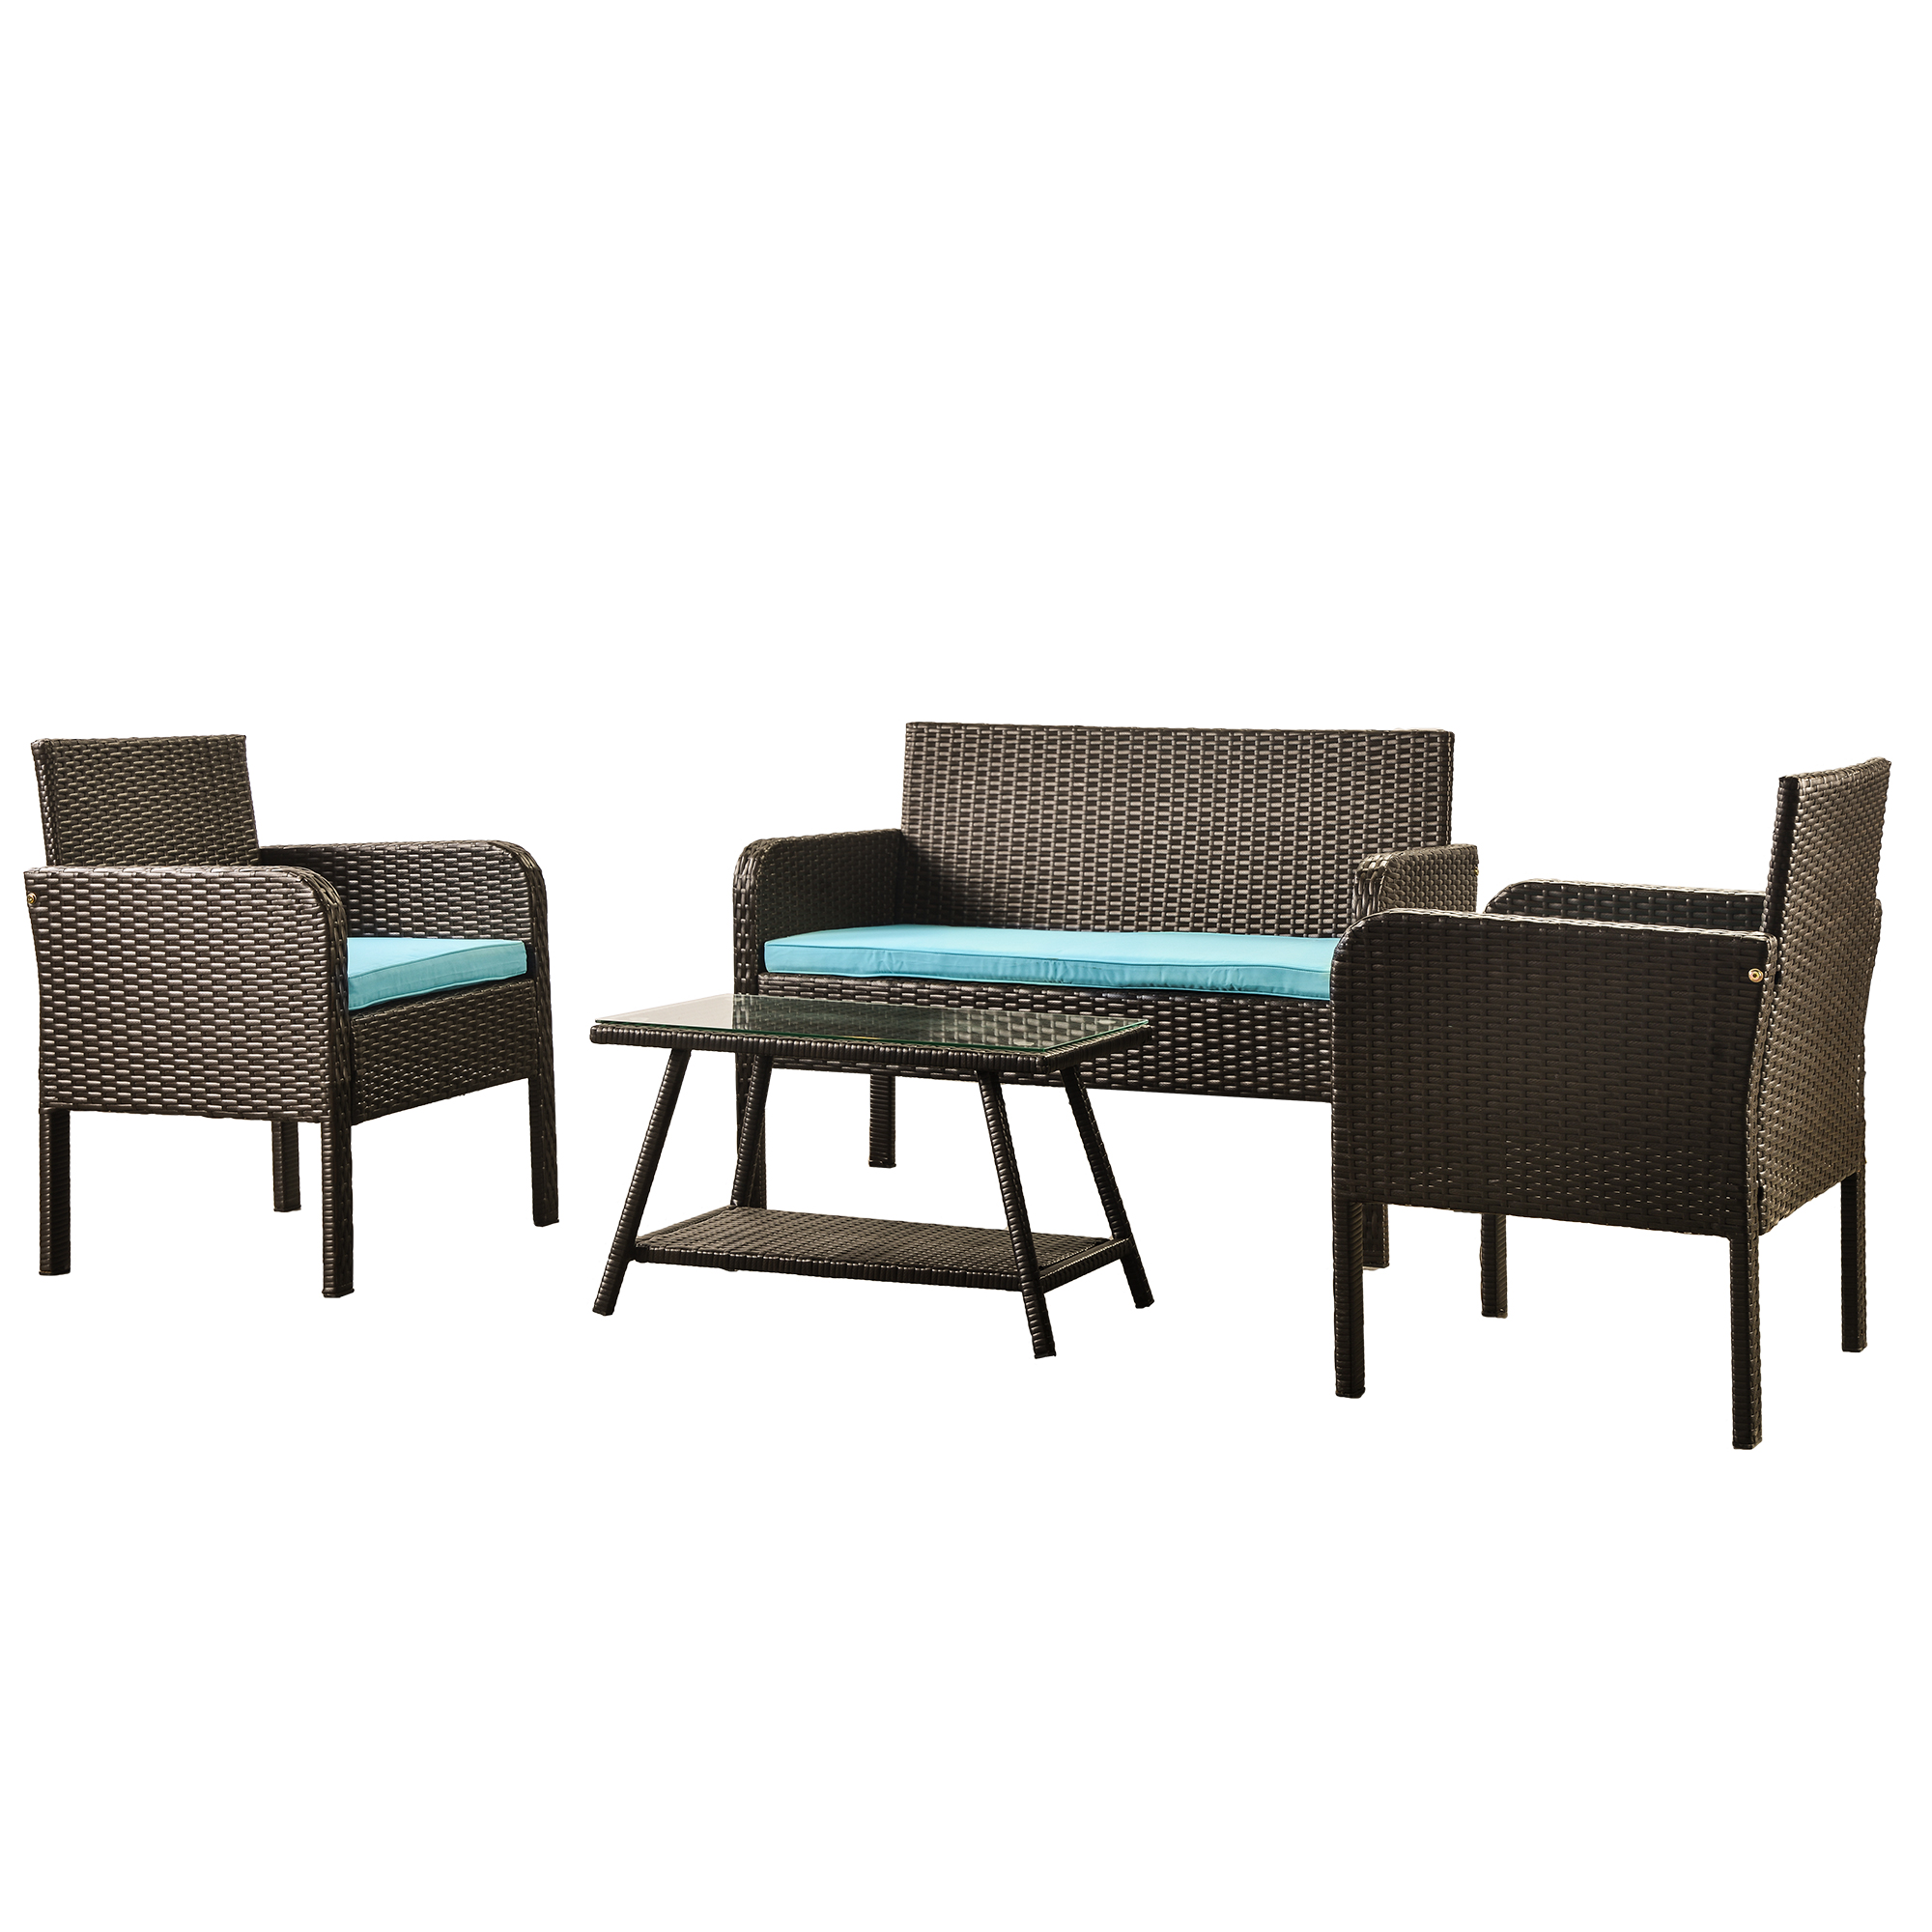 4 Piece Outdoor Patio Furniture Set, PE Rattan Wicker Sofa Set, Outdoor Sectional Furniture Chair Set with Cushions and Tea Table, Wicker Conversation Set for Backyard Lawn Porch Garden Poolside, B298 - image 2 of 7